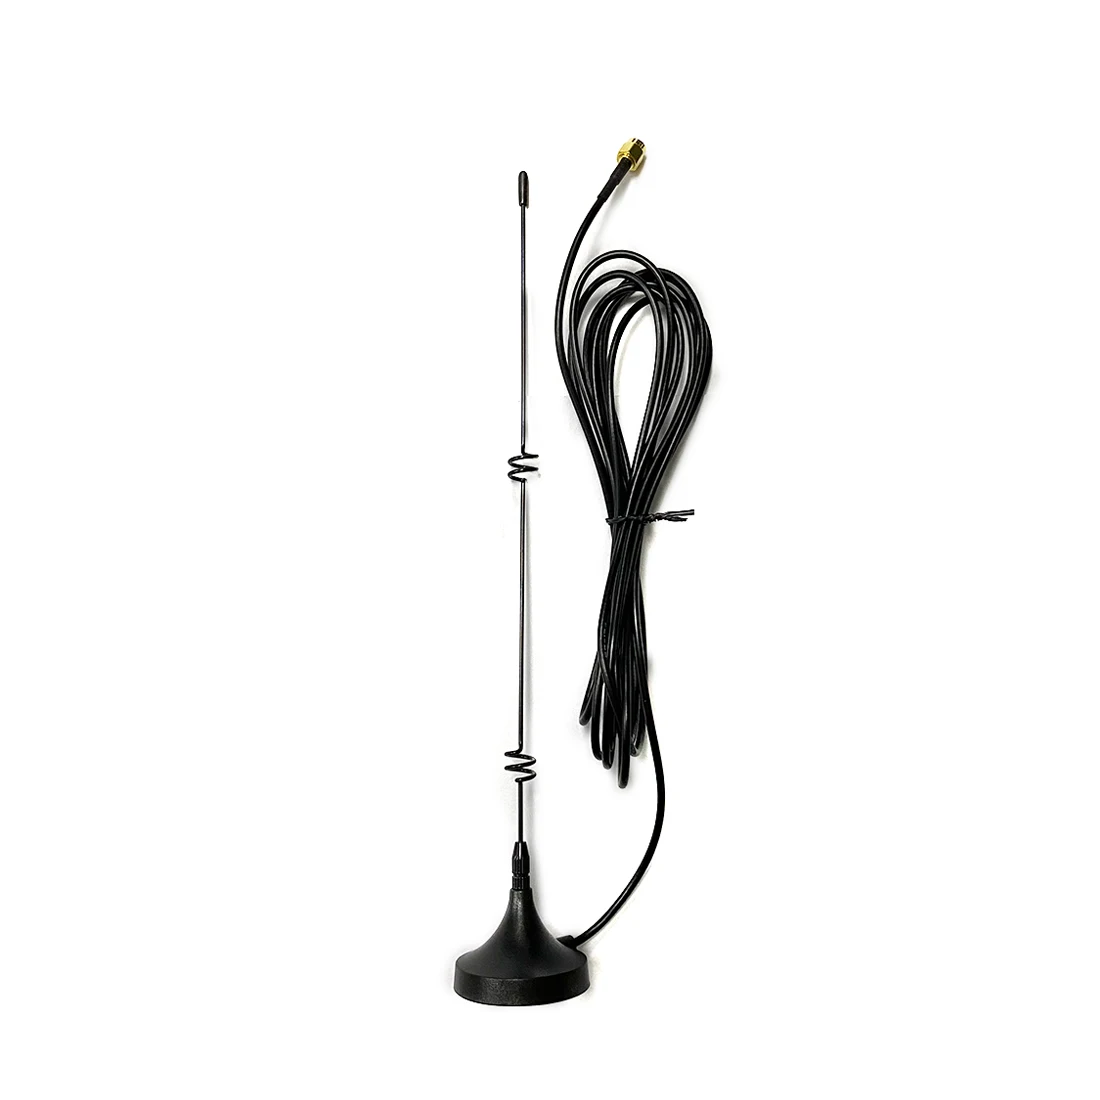 1PC 4G LTE antenna 6dbi high gain magnetic base with 3meters cable SMA/CRC9/TS9/BNC/TNC Connector - купить по выгодной цене |